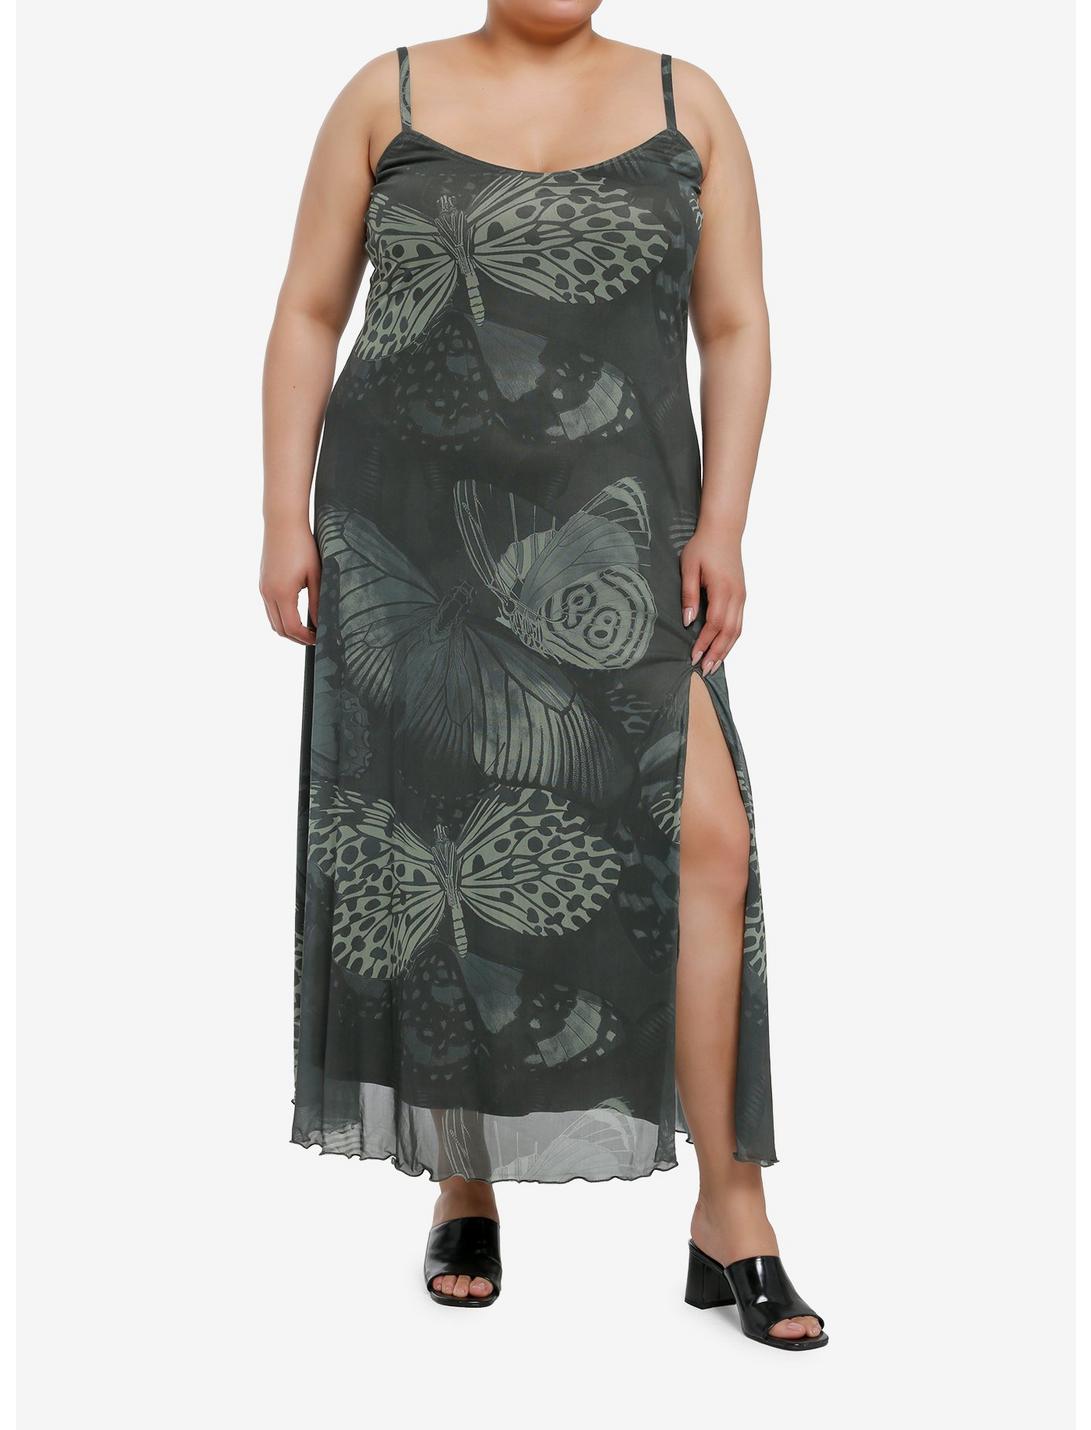 Thorn & Fable Green Butterfly Slit Maxi Dress Plus Size, GREEN, hi-res